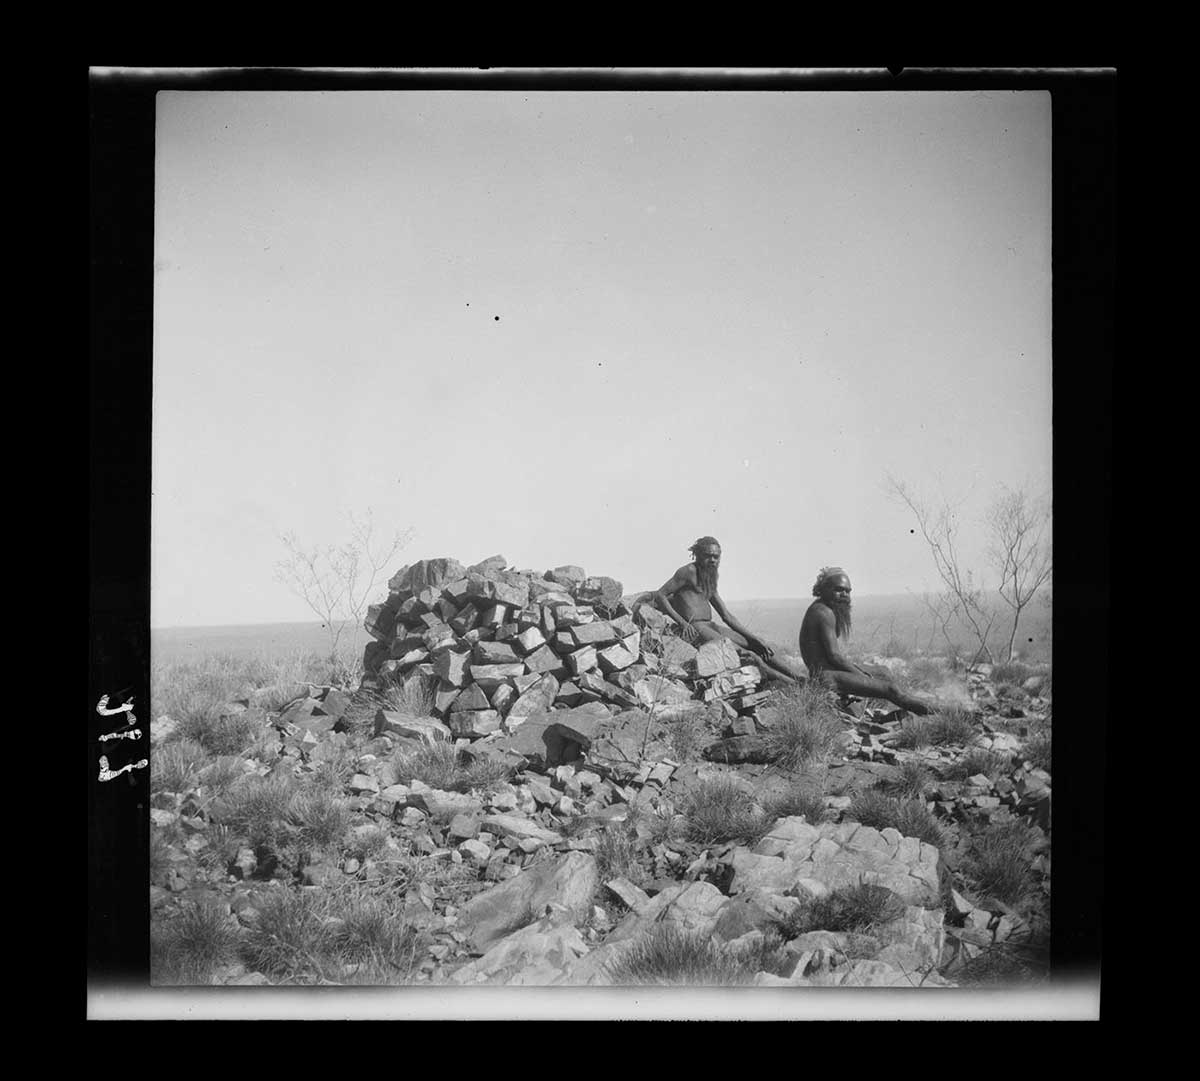 Two Aboriginal men, Artuatama and Mingerinnya, on the summit of Mount McCulloch (Nangorru), Petermann Ranges, Northern Territory 1926. The men sit to the right of a cairn of rocks in the centre of the image. One sits directly on the cairn, the other sits at its edge. Both face to the right of the image. The ground around them is covered in rocks and tufts of grass. The horizon is visible in the background. It slopes slightly down from right to left, suggesting that the camera was not level when the photograph was taken. The sky in the image appears to be compeletly cloud-free. - click to view larger image